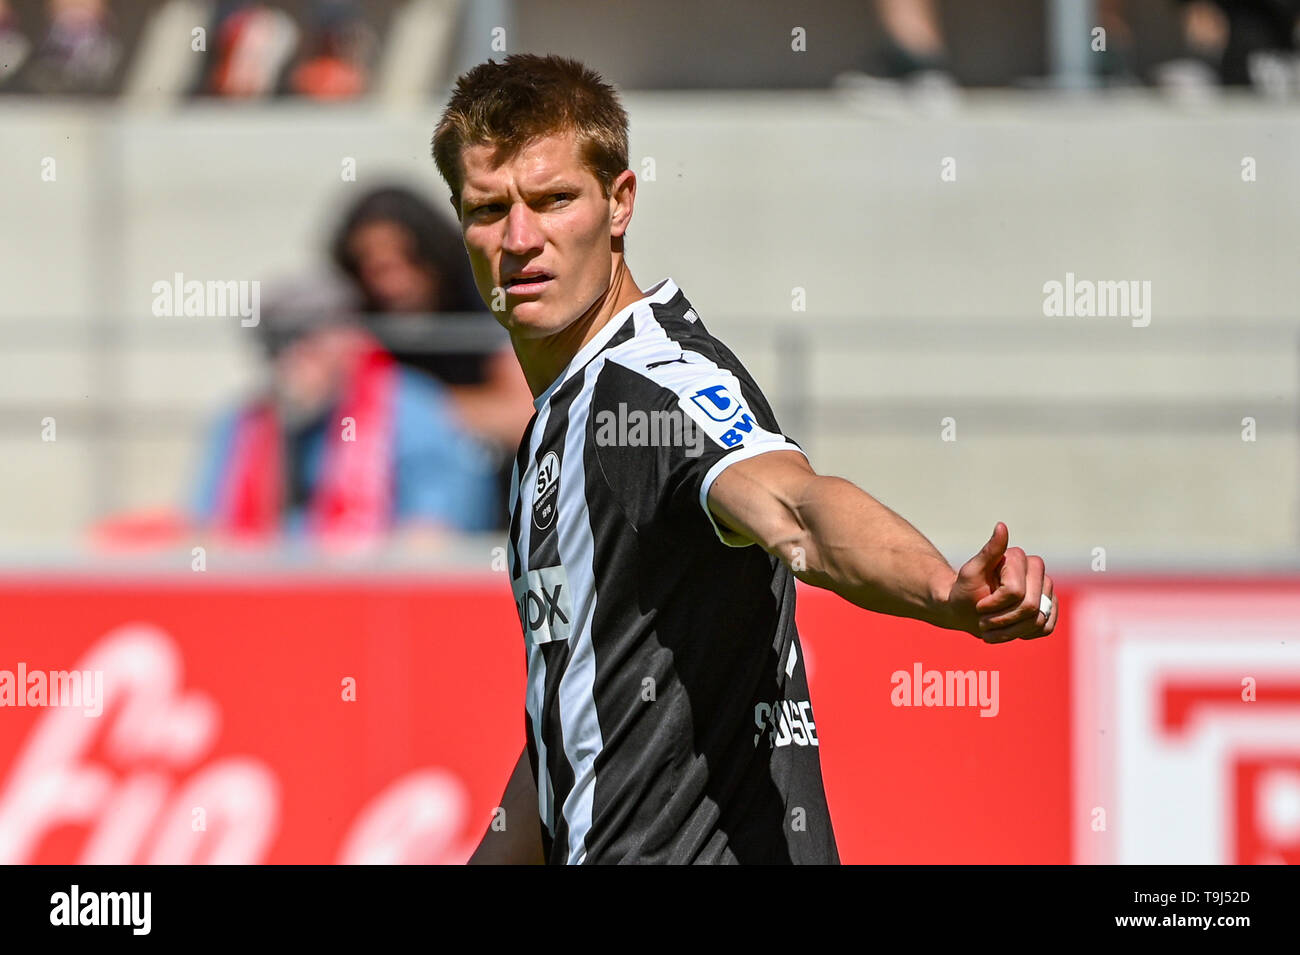 Regensburg, Germany. 19th May, 2019. Soccer: 2nd Bundesliga, Jahn Regensburg - SV Sandhausen, 34th matchday in the Continental Arena. Kevin Behrens von Sandhausen cheers after his goal to 0:1. Credit: Armin Weigel/dpa - IMPORTANT NOTE: In accordance with the requirements of the DFL Deutsche Fußball Liga or the DFB Deutscher Fußball-Bund, it is prohibited to use or have used photographs taken in the stadium and/or the match in the form of sequence images and/or video-like photo sequences./dpa/Alamy Live News Stock Photo